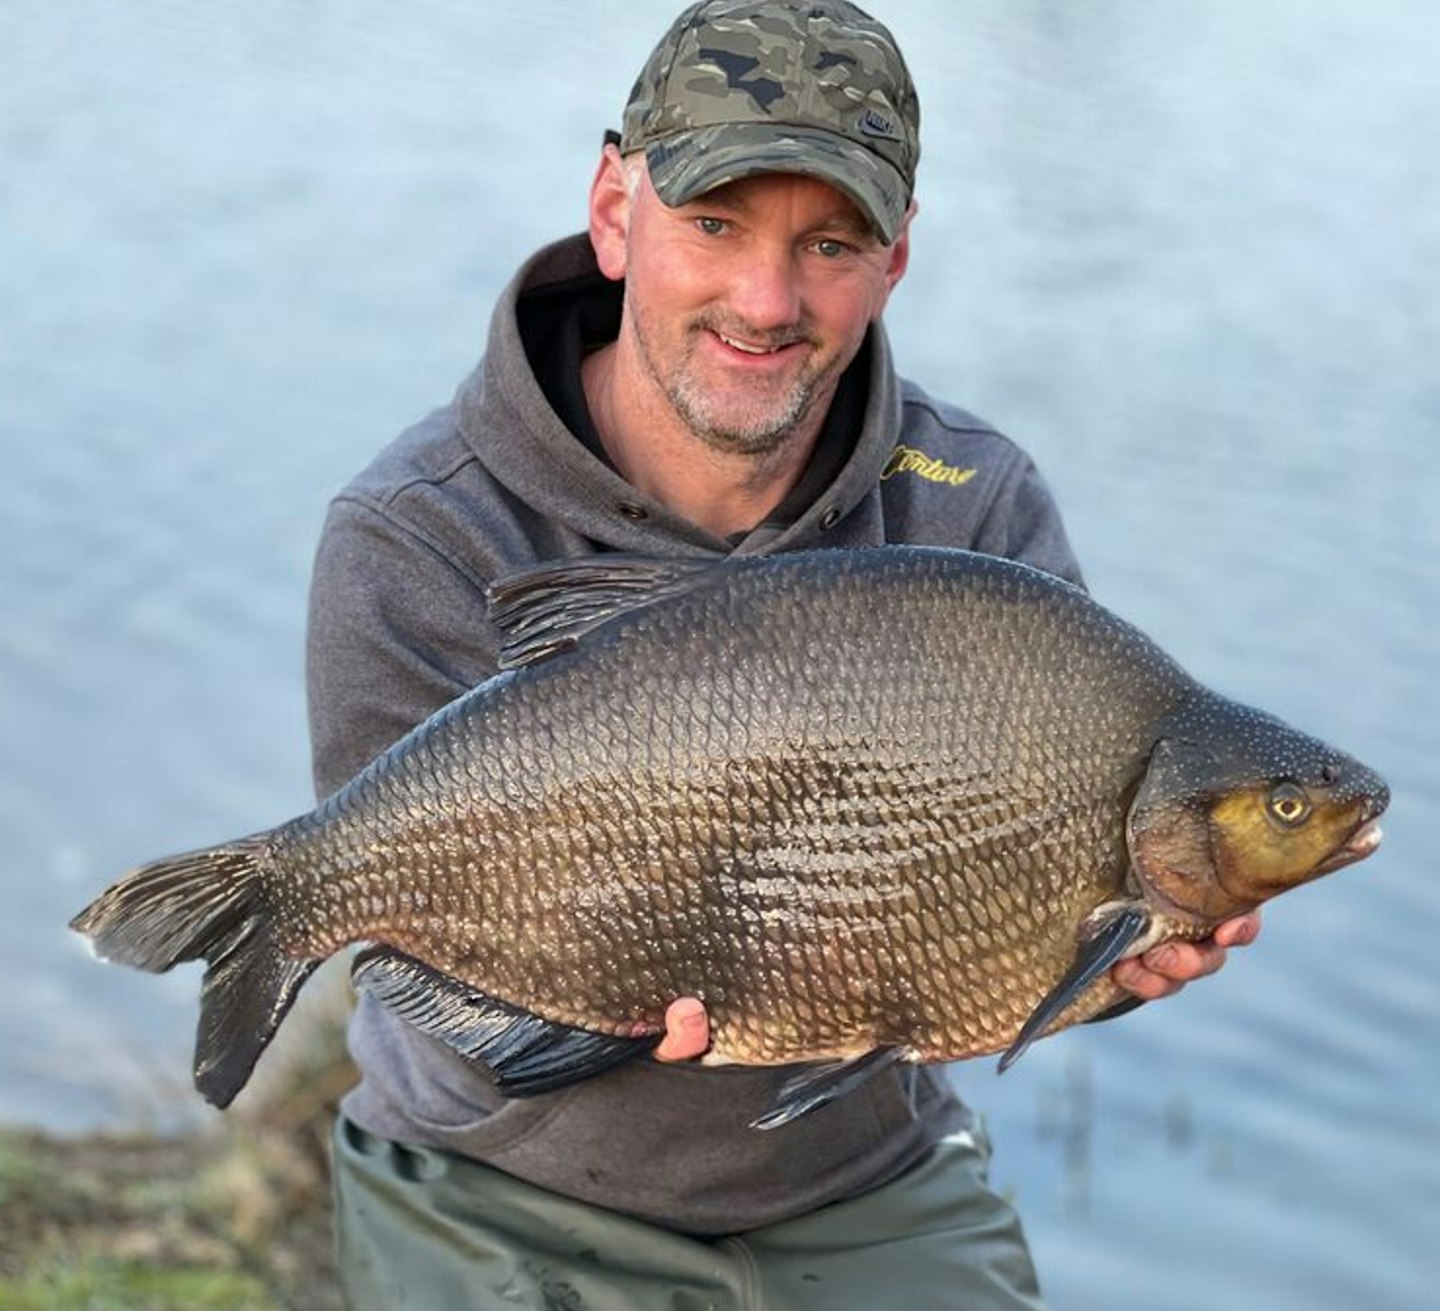 Bream expert Lee McManus led the way when he showed the nation his new personal best fish of 17lb 12oz